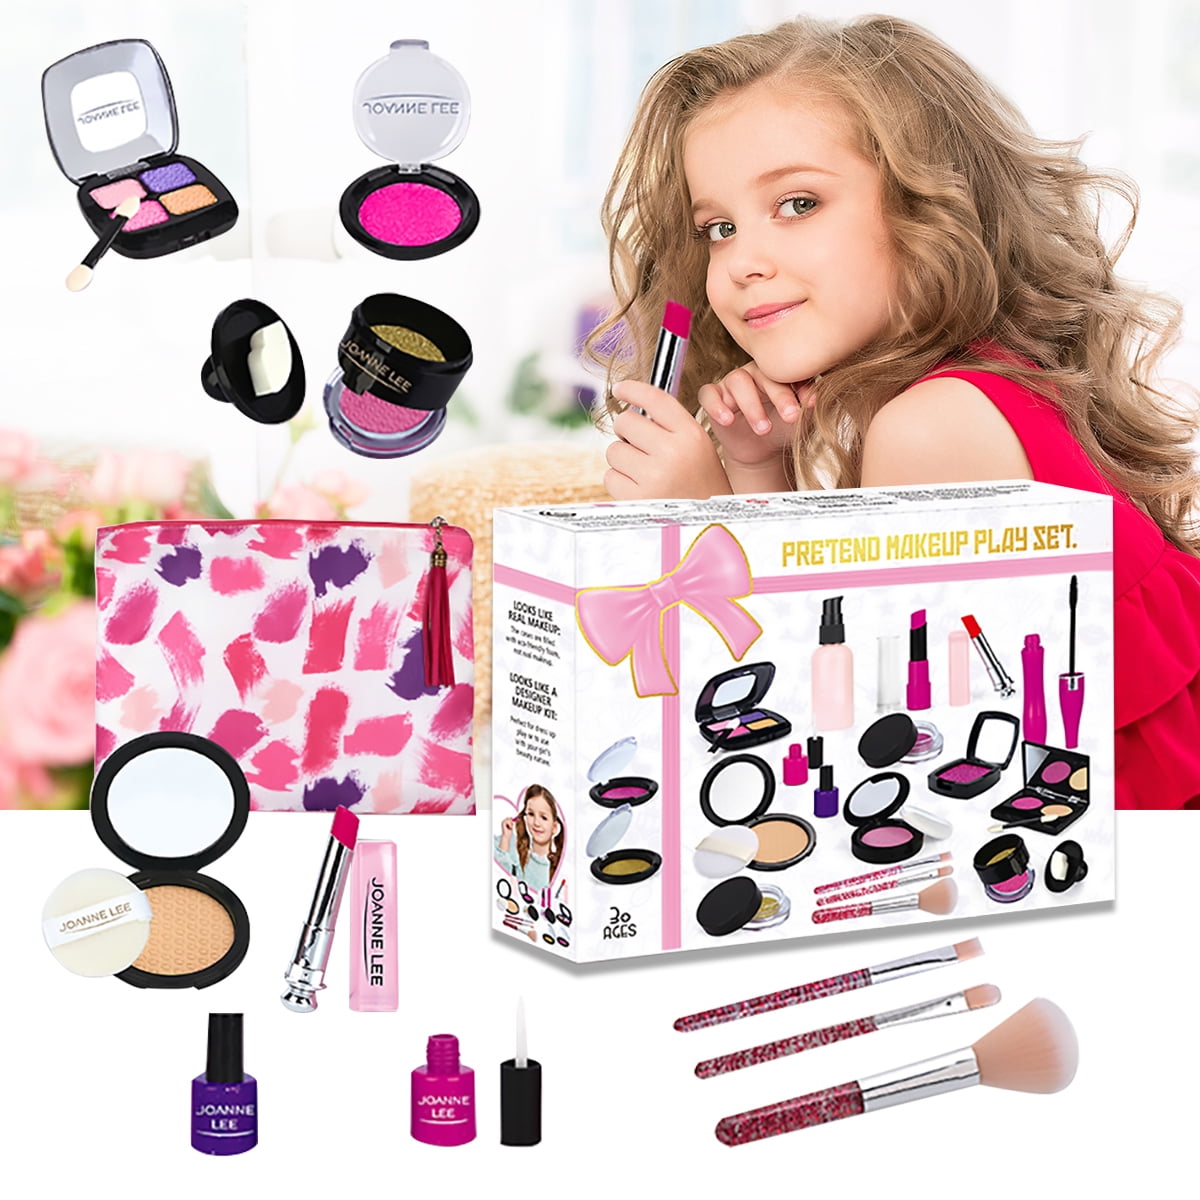 Zioblw Pretend Makeup Kit Toys for 2, 3, 4, 5 Year Old Girls, First Make Up Set for Little Princess Play Dress Up, Kids Cosmetic, Best Birthday Gift